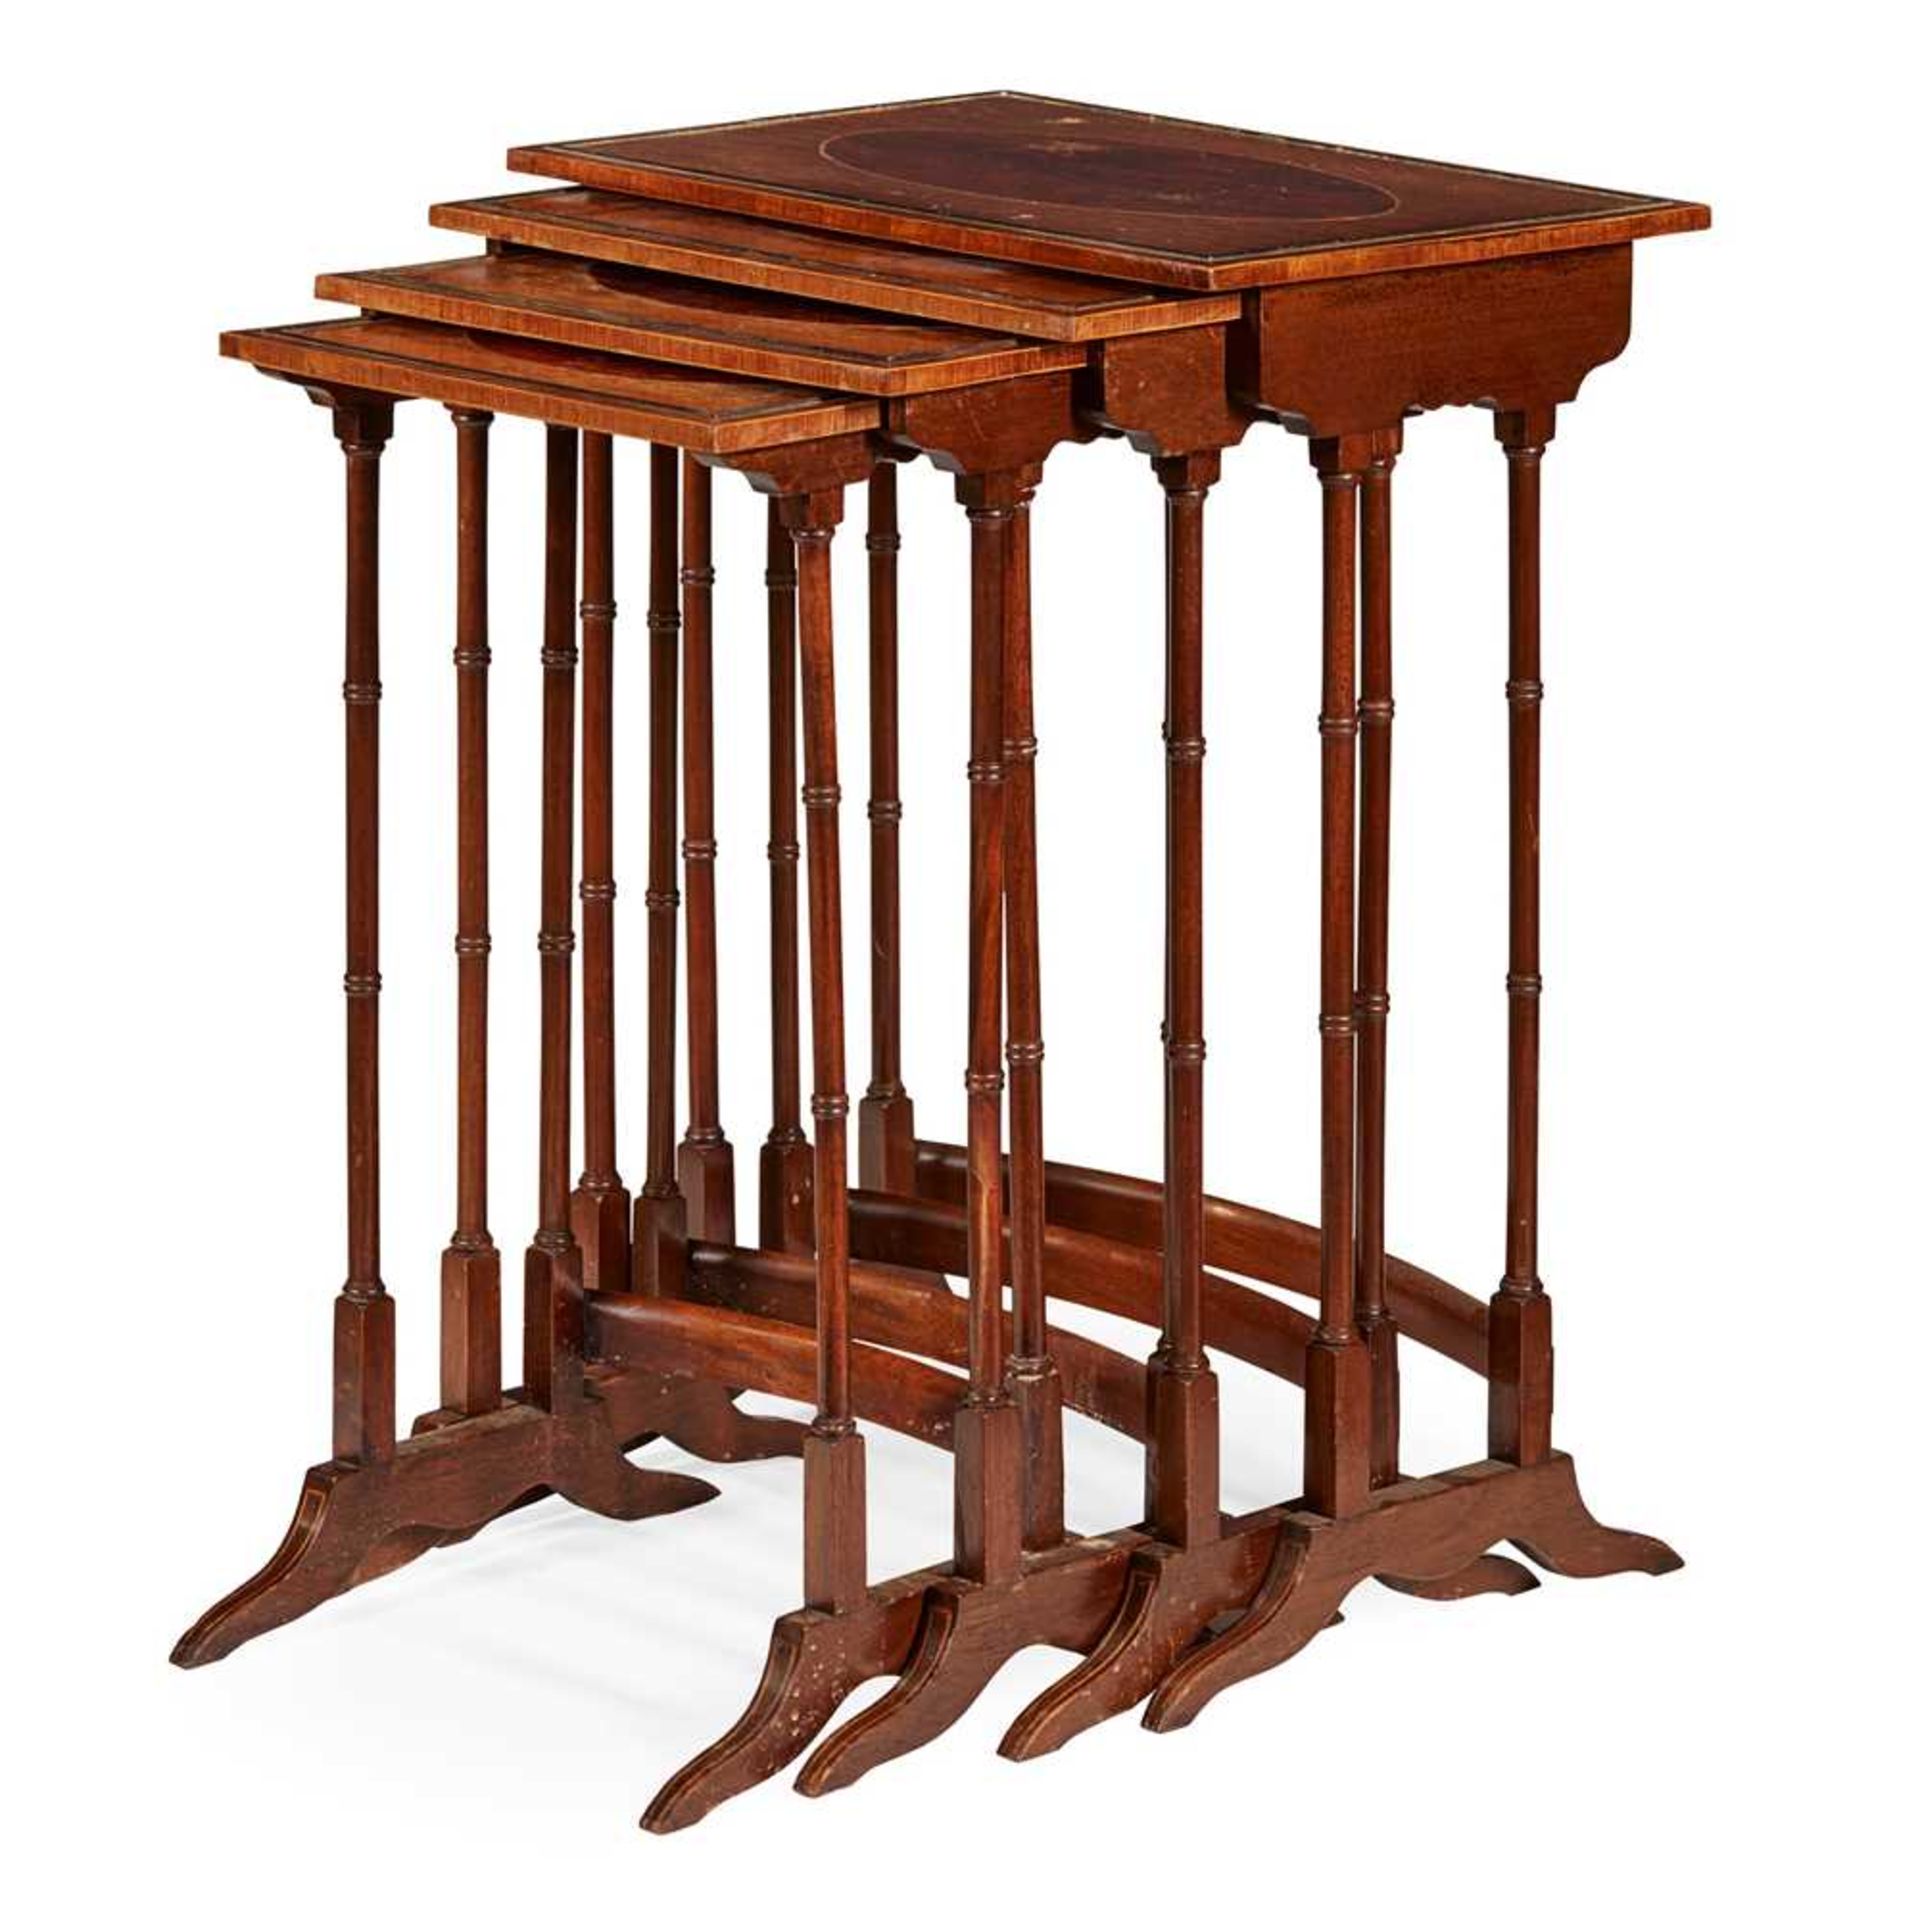 SET OF REGENCY STYLE SATINWOOD AND MAHOGANY INLAID NESTING TABLES 19TH CENTURY